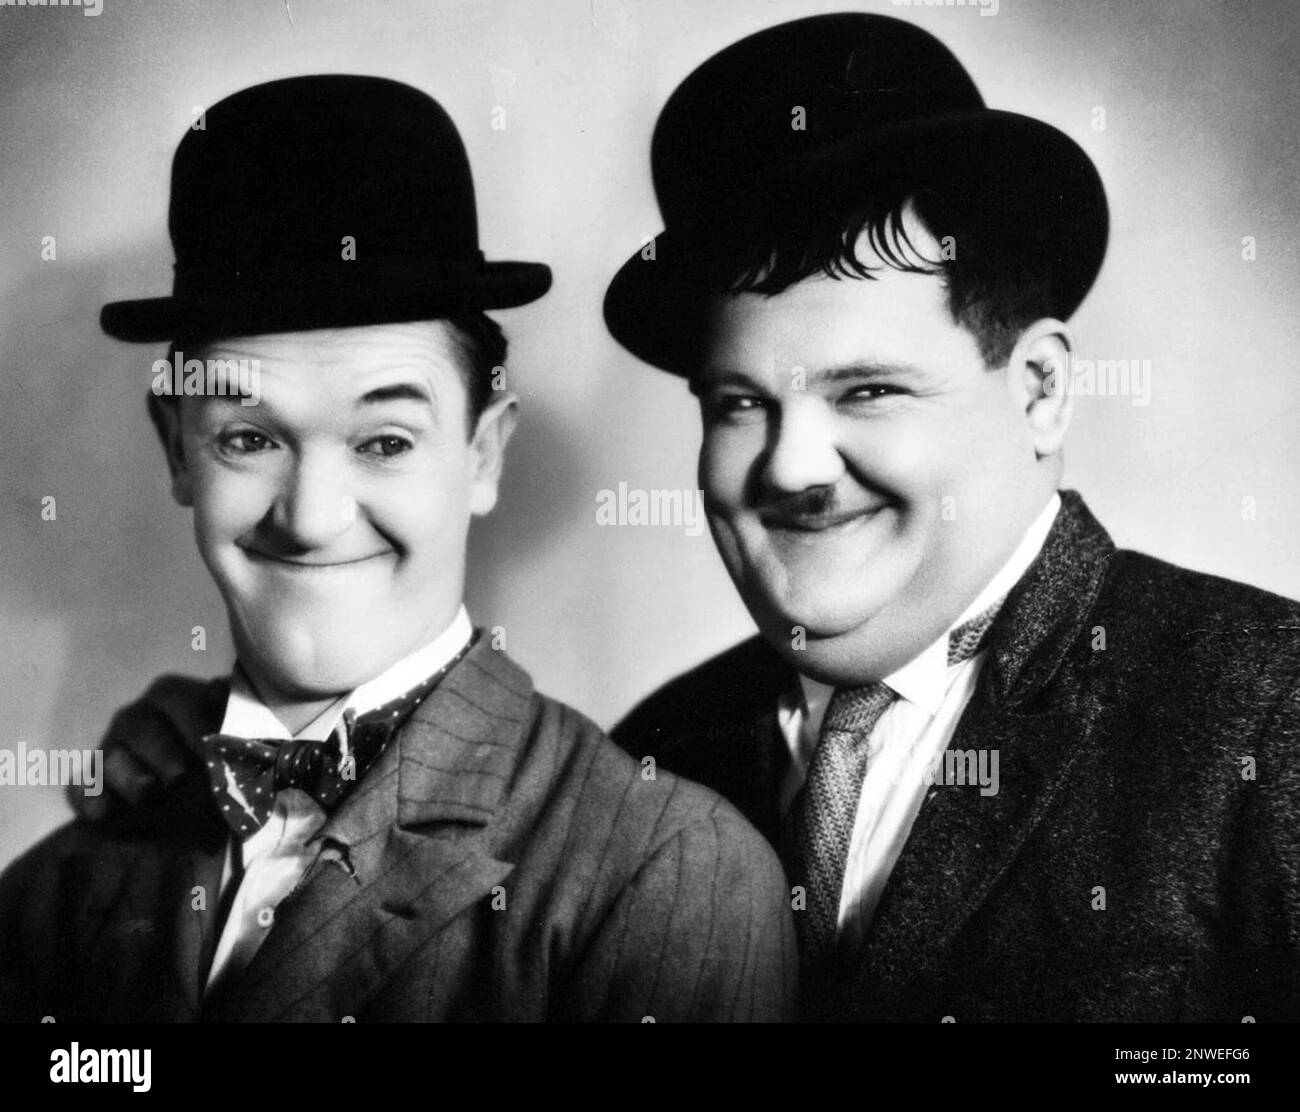 Laurel and Hardy, British-American comedy duo act during the early Classical Hollywood era of American cinema, Englishman Stan Laurel (1890–1965) and American Oliver Hardy (1892–1957). Stock Photo